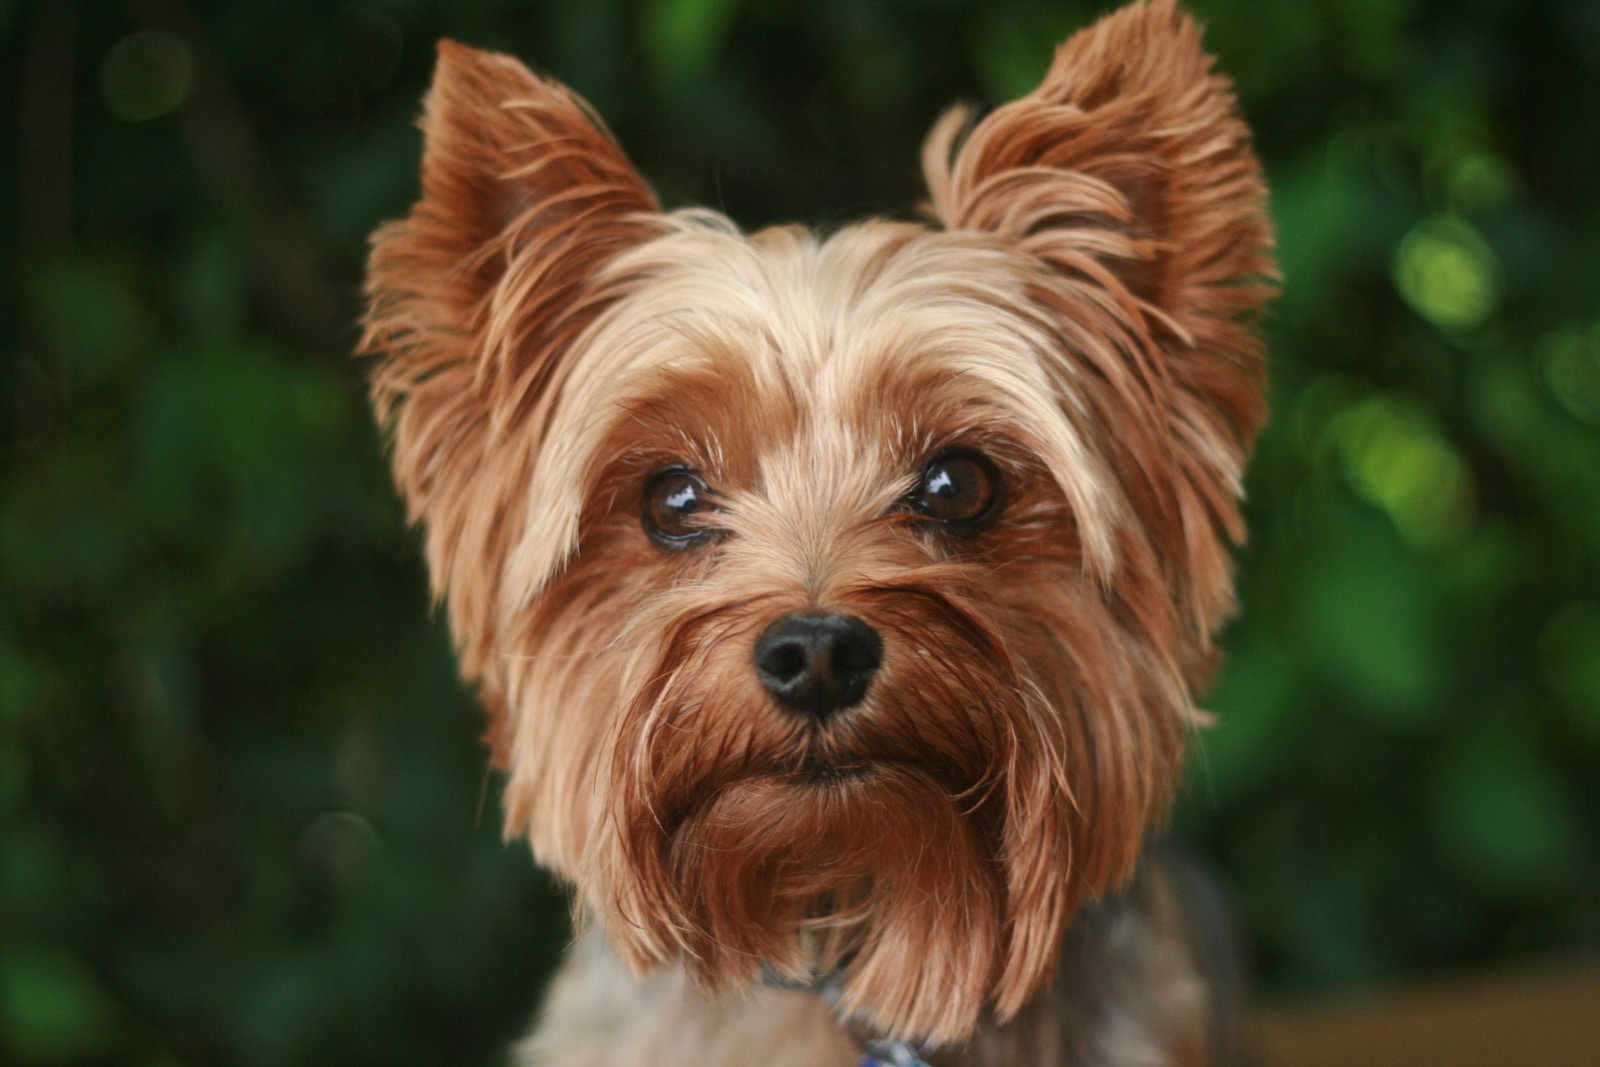 The Yorkshire Terrier Guide – History, Temperament, Care, and More!